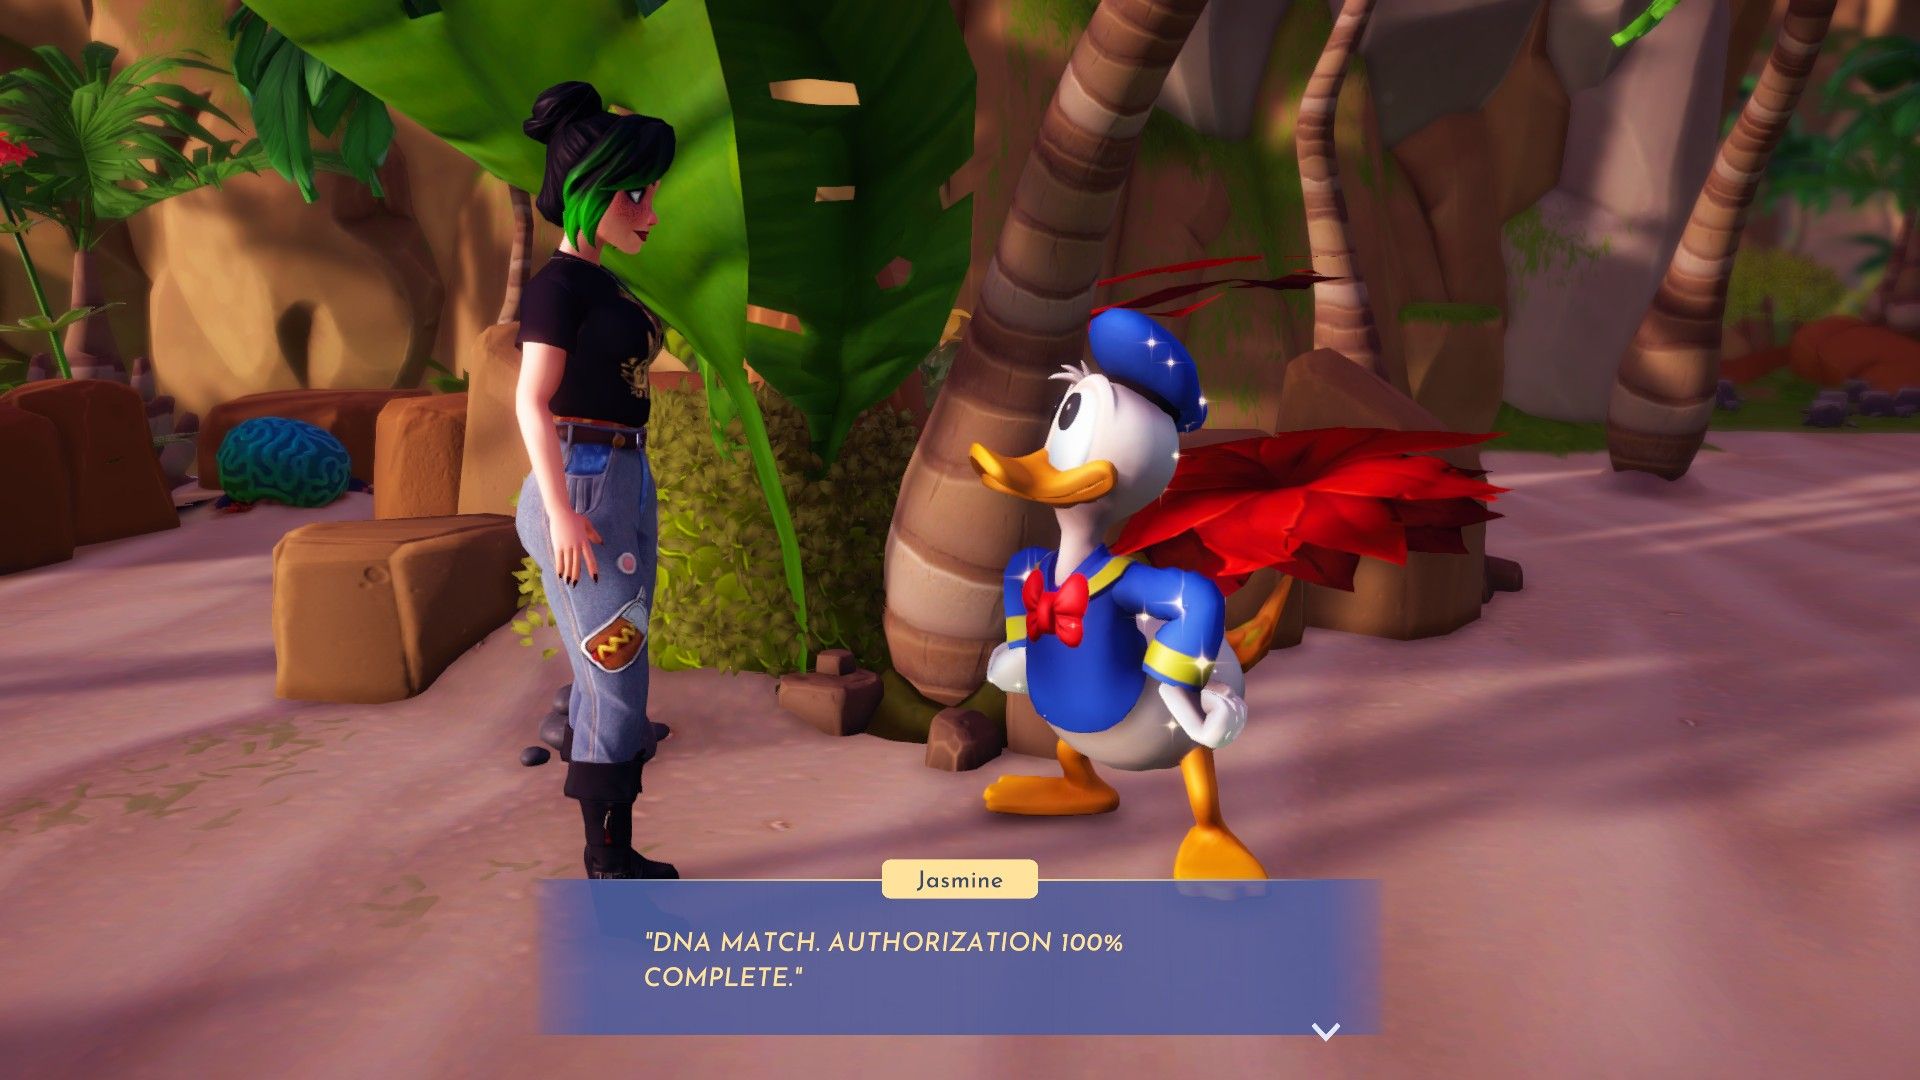 The Founder and Donald puzzle over the strange sock thief problem on Dazzle Beach in Disney Dreamlight Valley